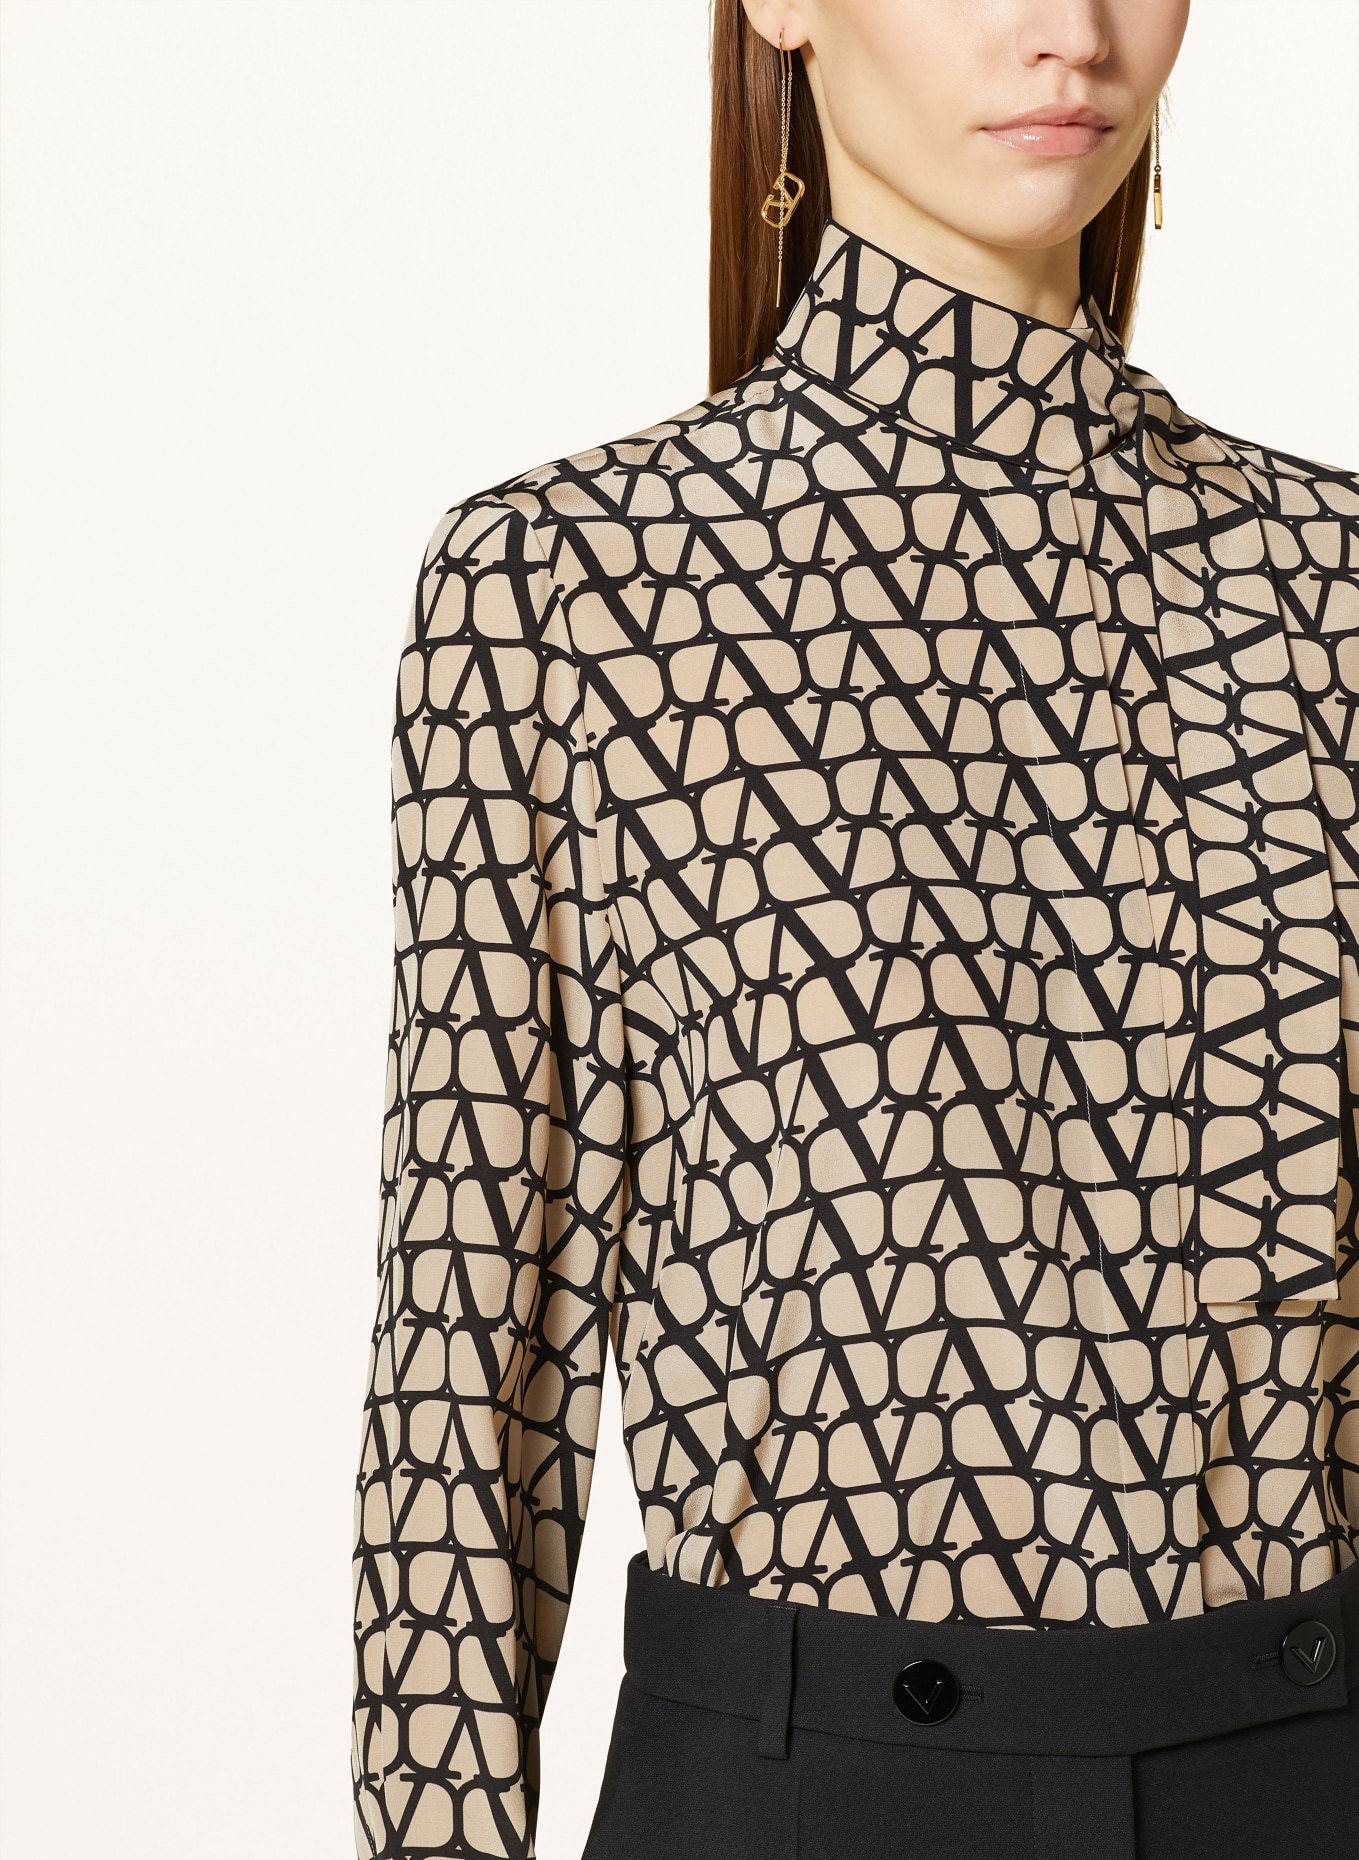 VALENTINO Bow-tie blouse VLOGO made of silk, Color: BEIGE/ BLACK (Image 4)